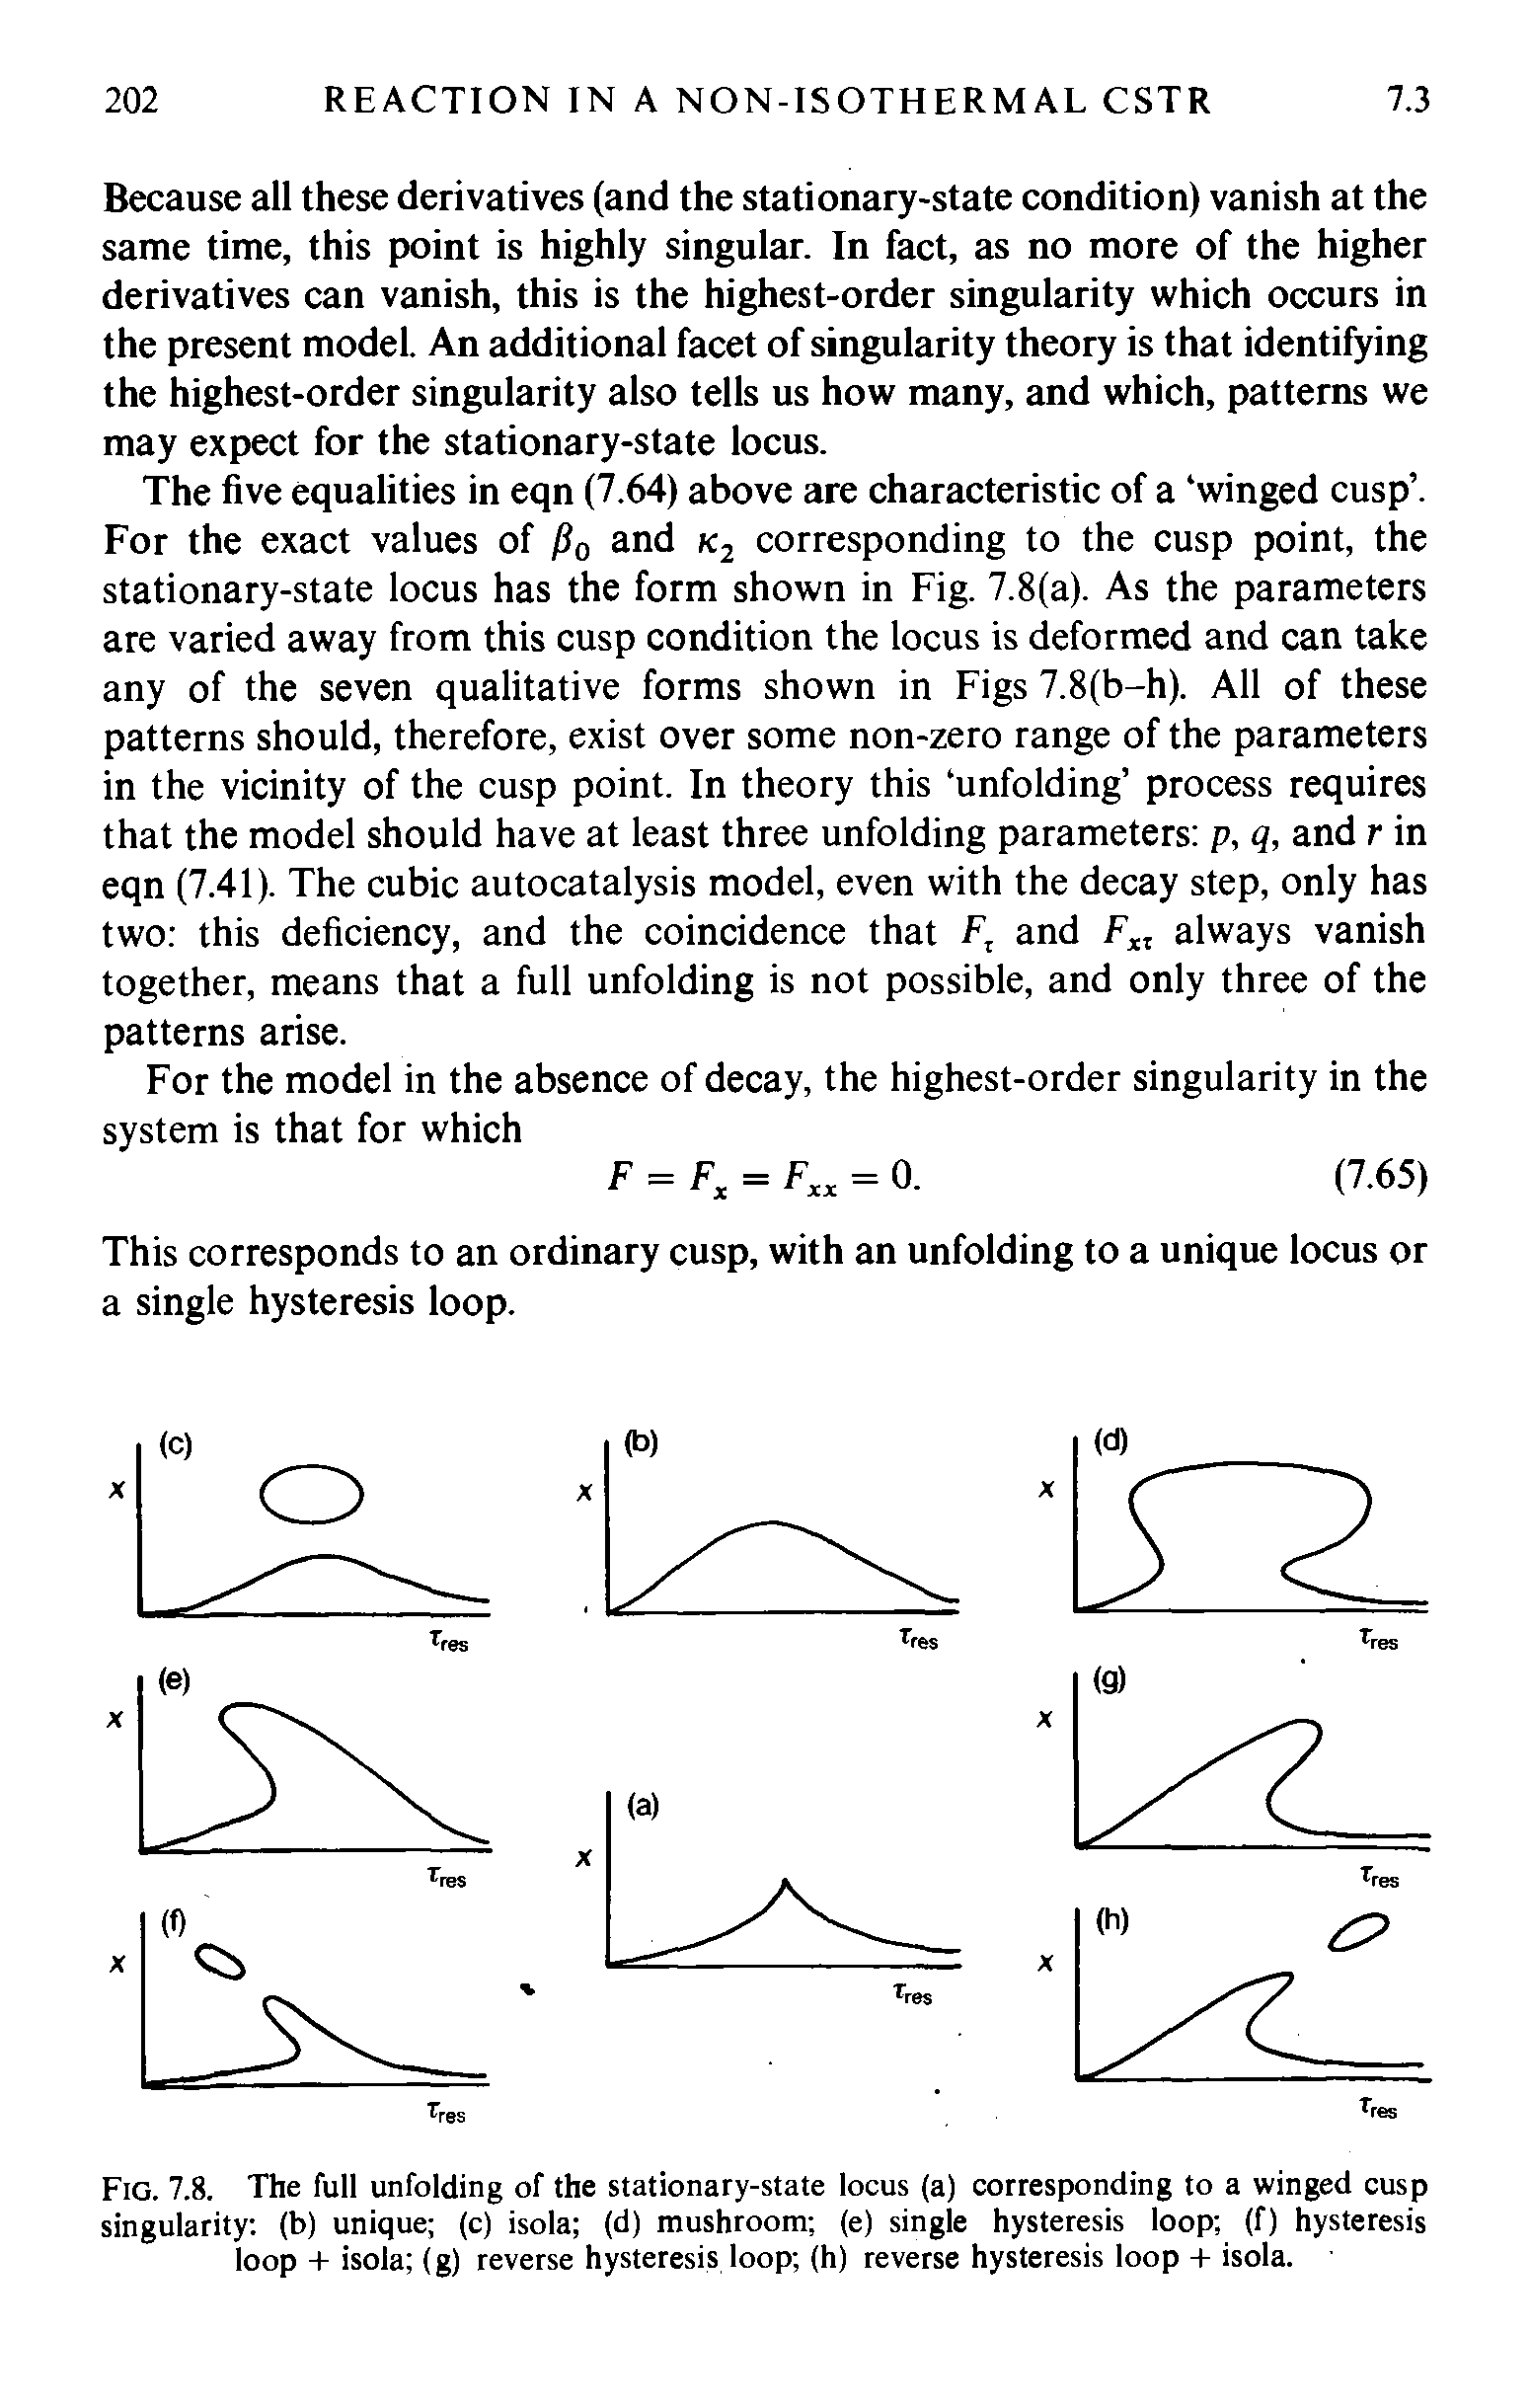 Fig. 7.8. The full unfolding of the stationary-state locus (a) corresponding to a winged cusp singularity, (b) unique (c) isola (d) mushroom (e) single hysteresis loop (f) hysteresis loop + isola (g) reverse hysteresis loop (h) reverse hysteresis loop + isola.